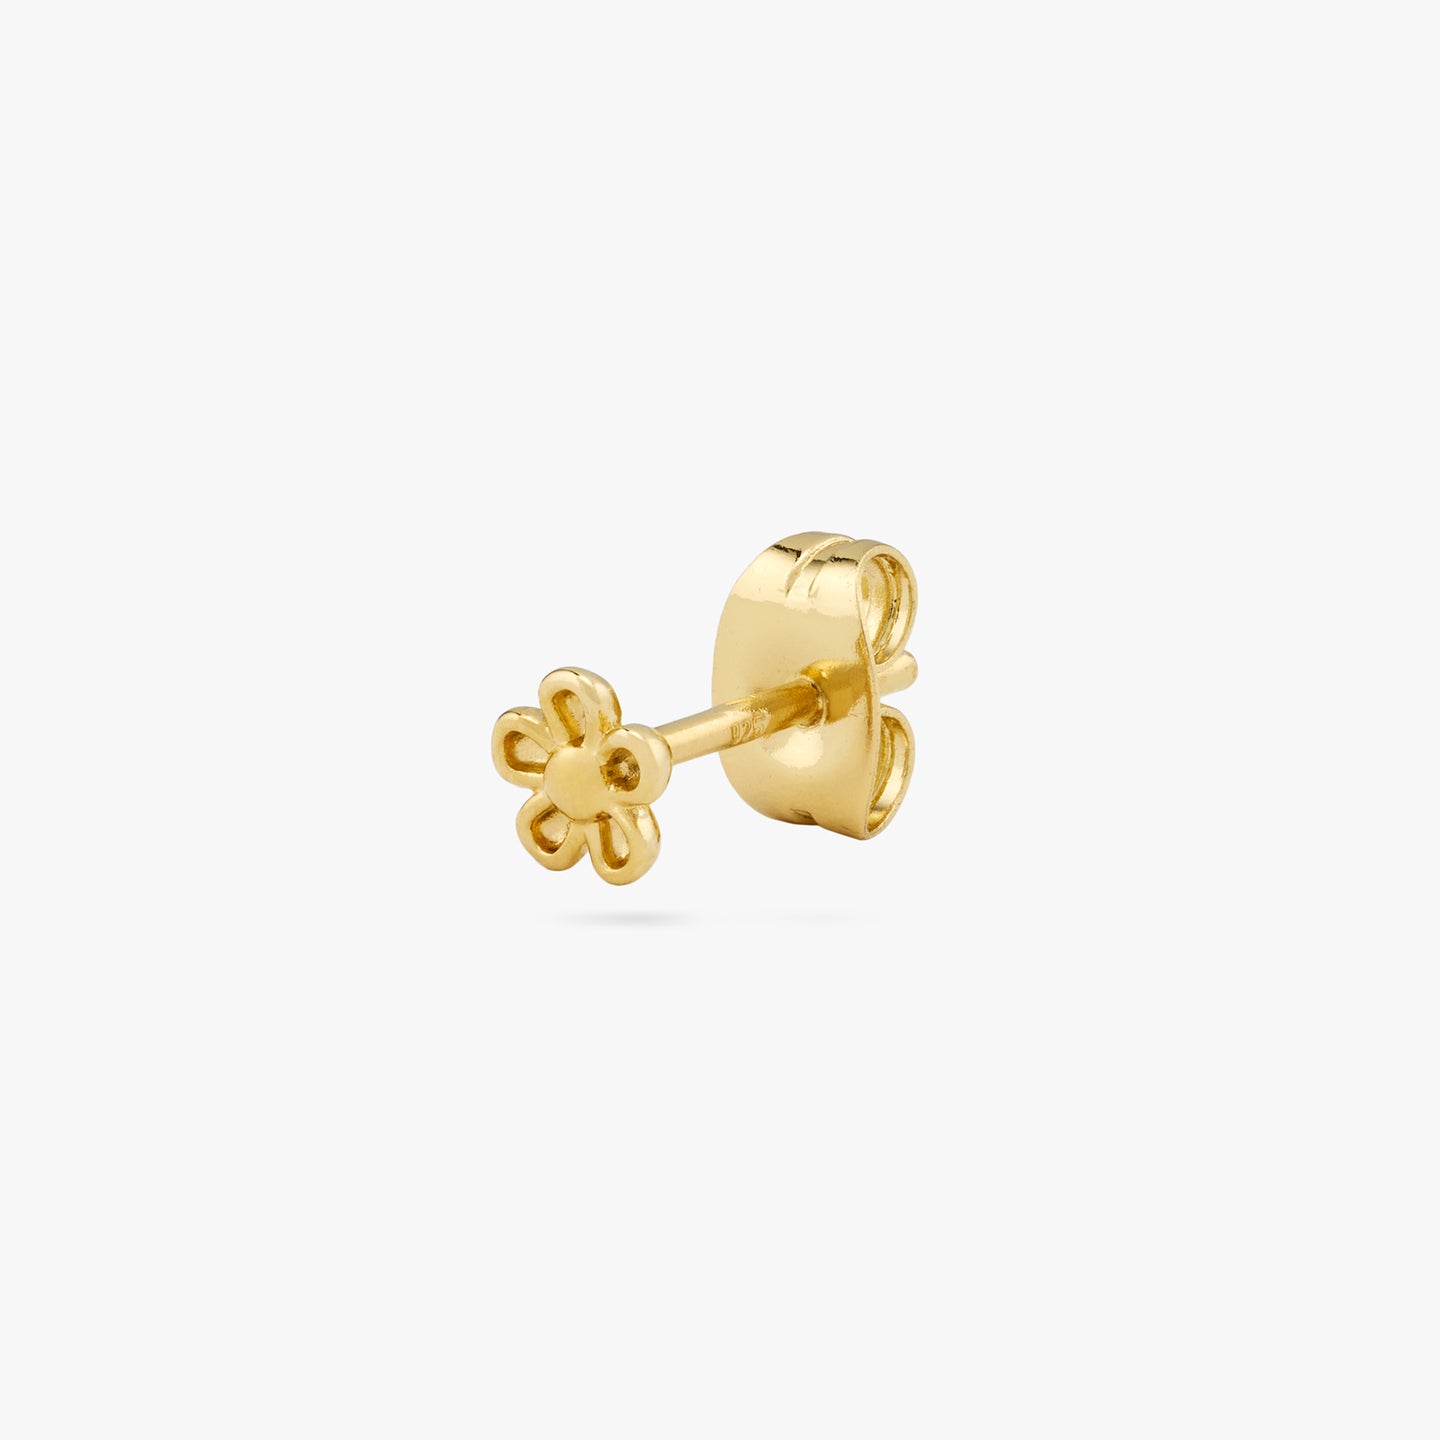 This is a small gold daisy stud color:null|gold